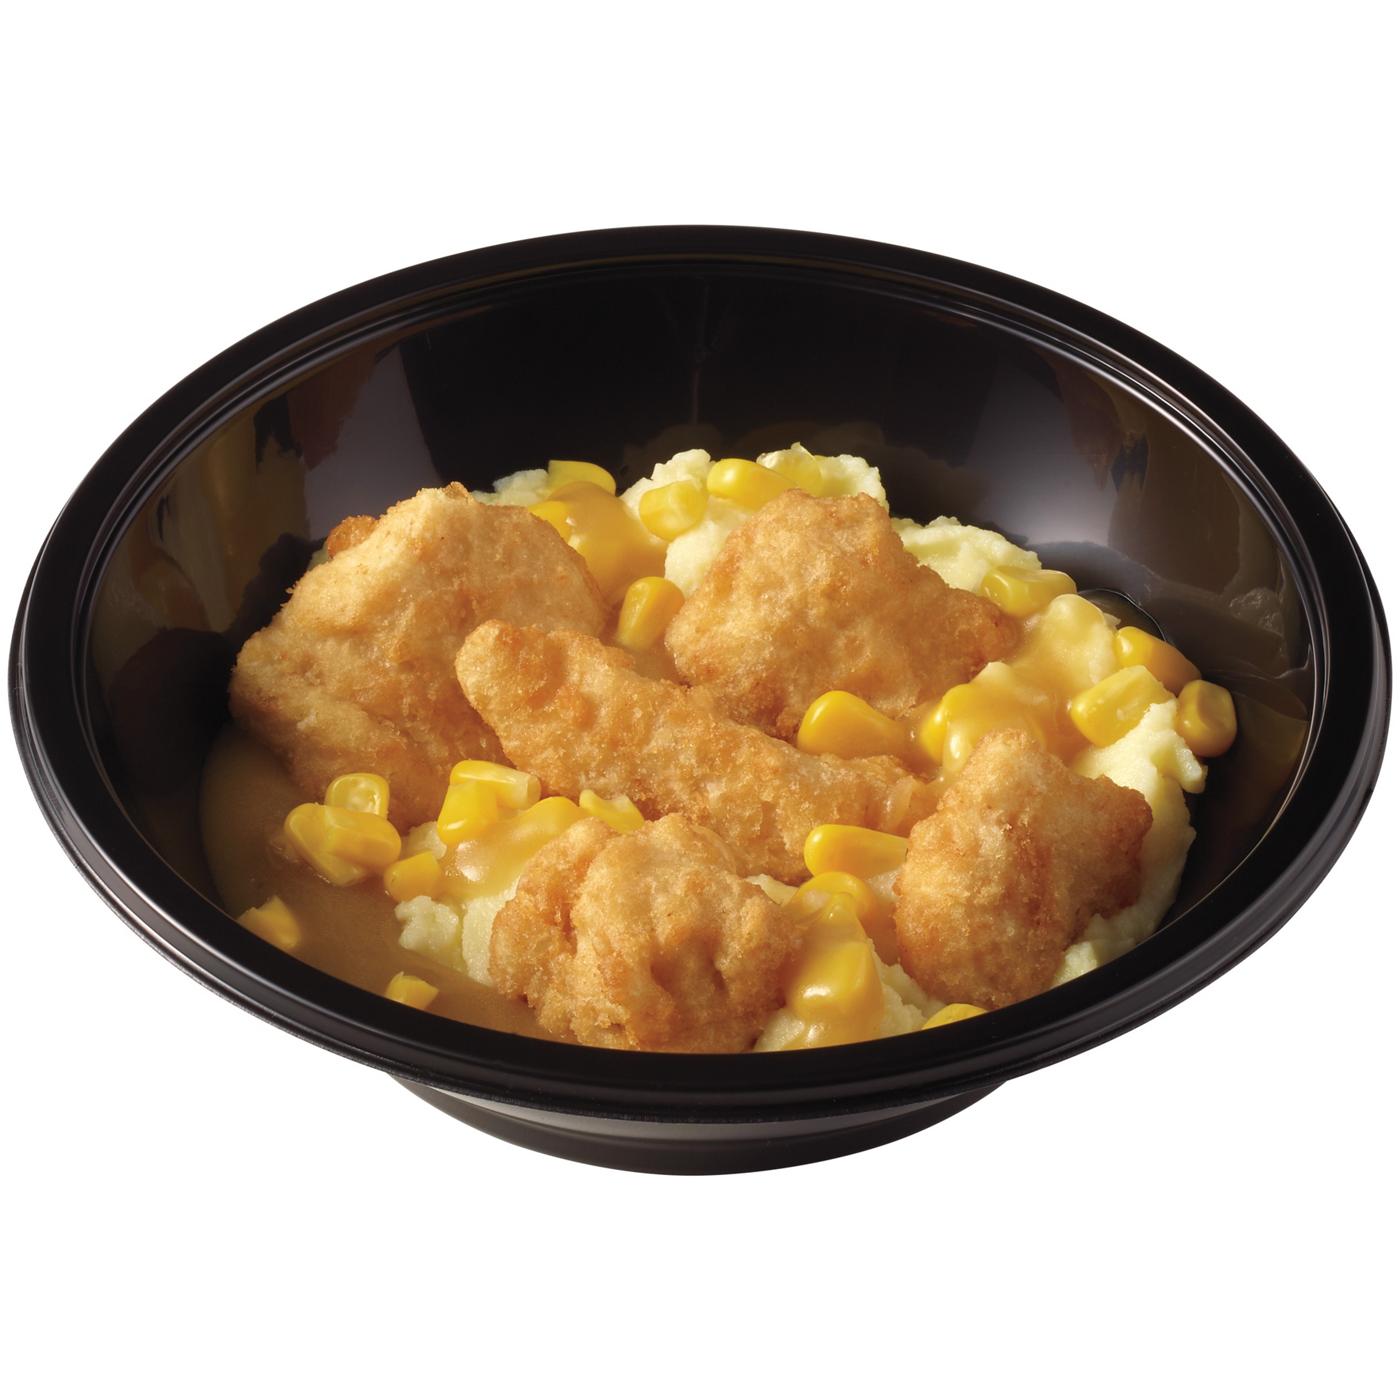 Meal Simple by H-E-B Breaded Chicken, Mashed Potatoes & Corn Bowl; image 4 of 5